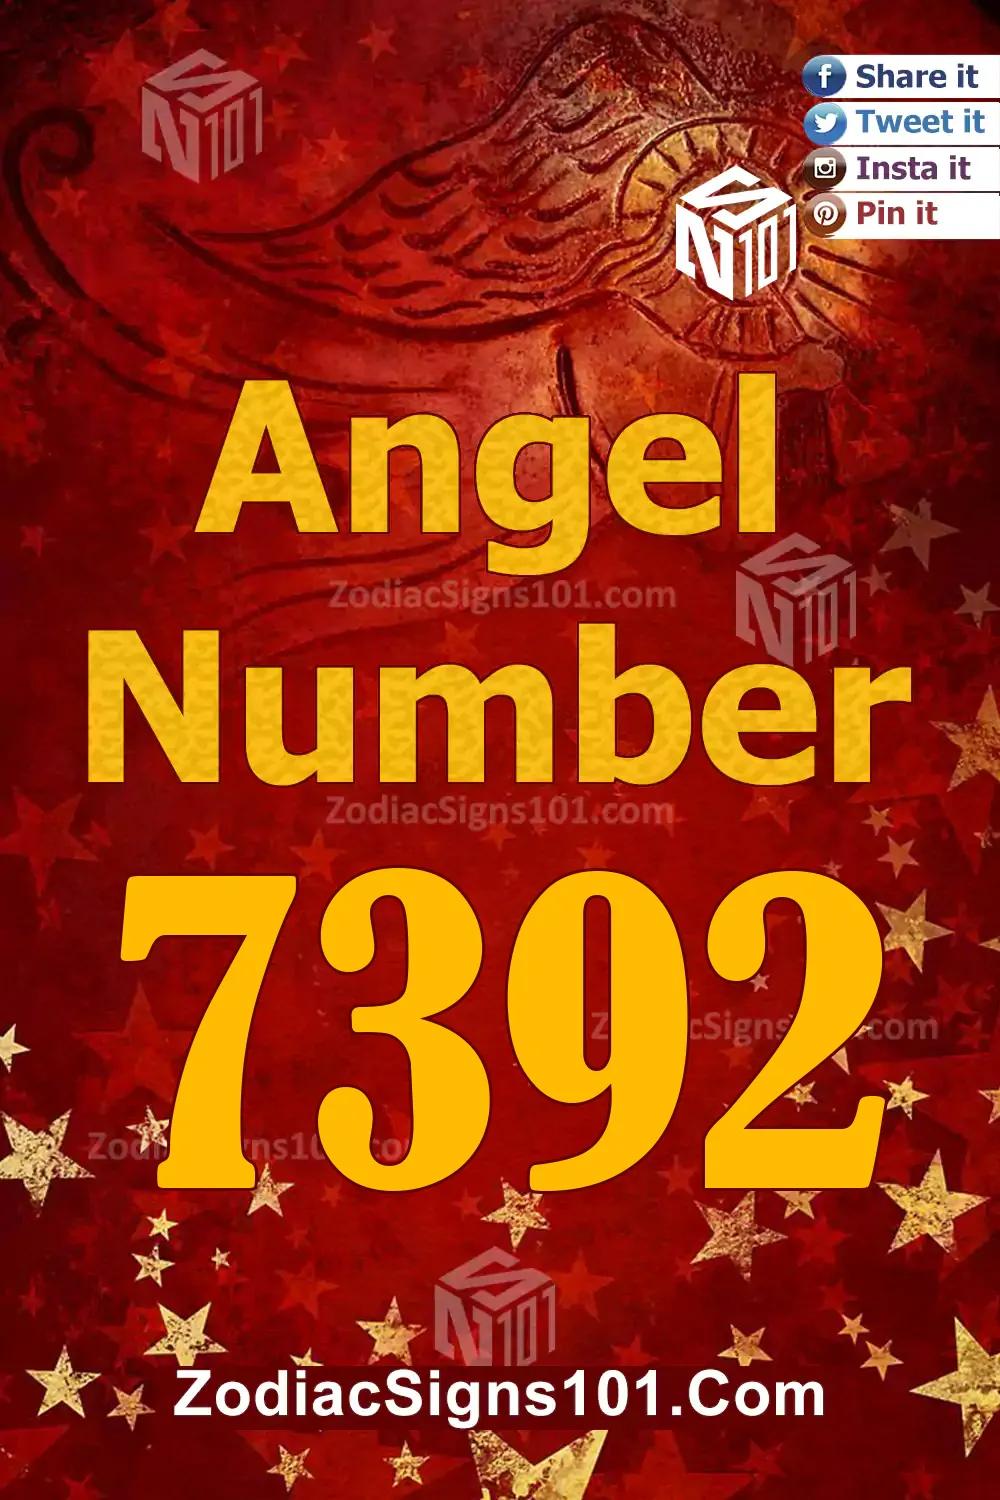 7392 Angel Number Meaning